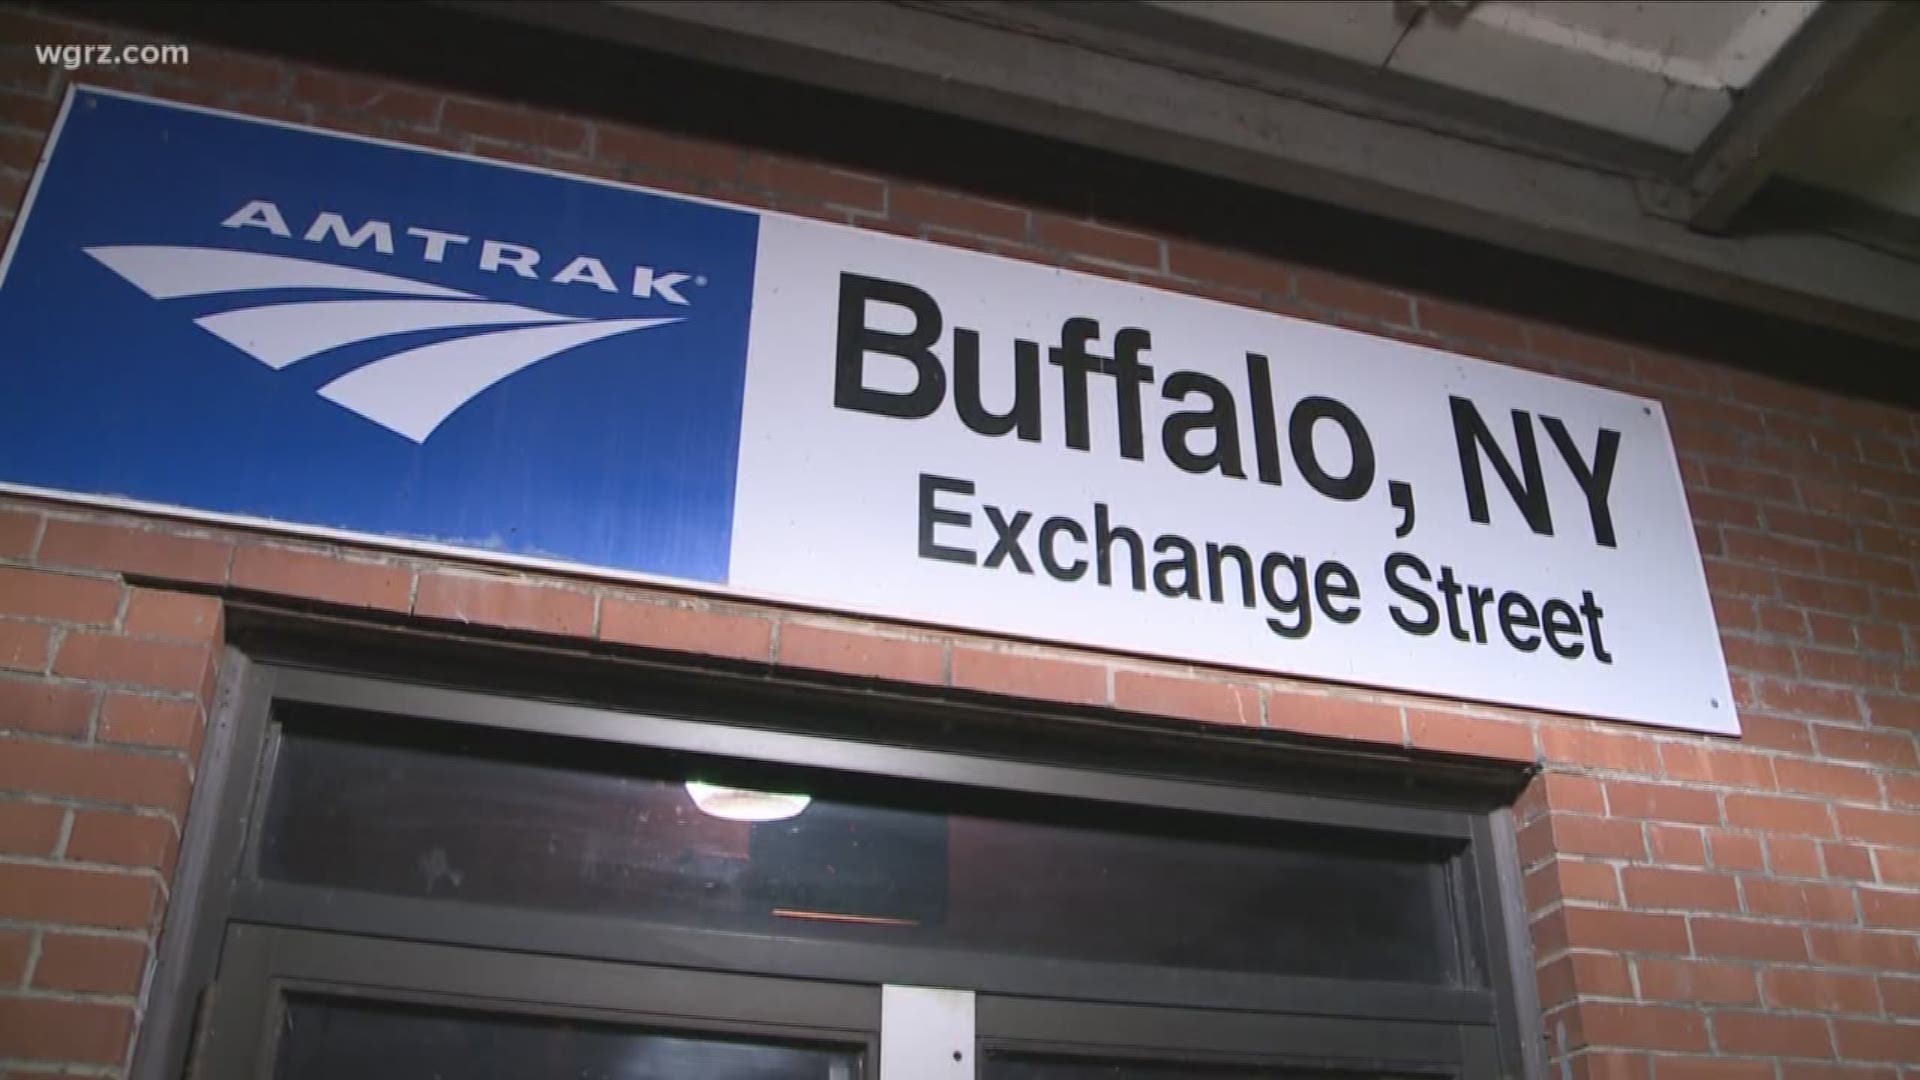 Plans for new Buffalo train station revealed